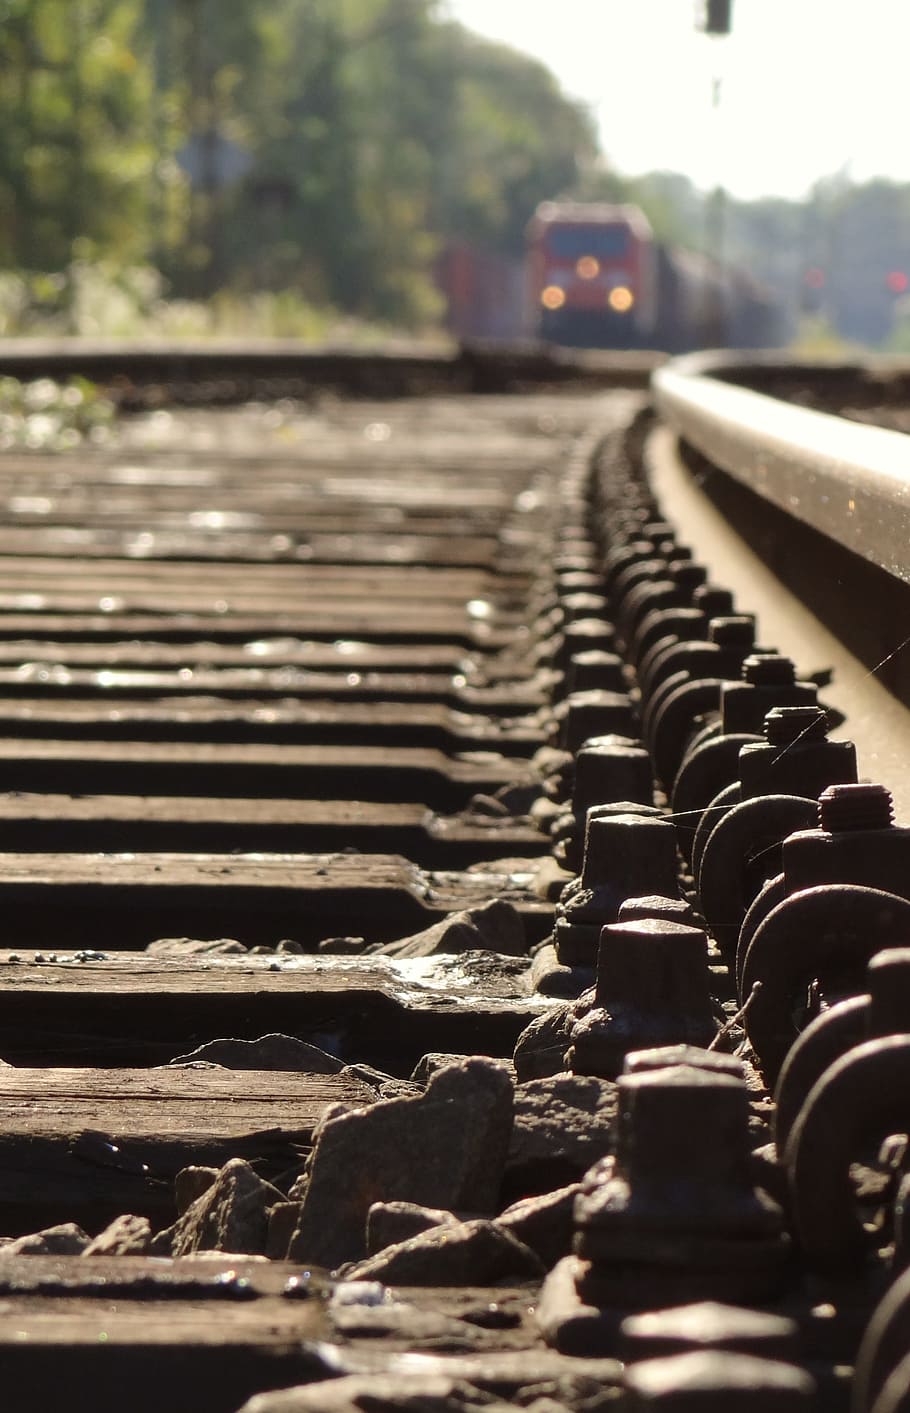 selective, focus photography, railroad, track bed, freight train, ballast construction, wooden sleepers, threshold, track, spring ring